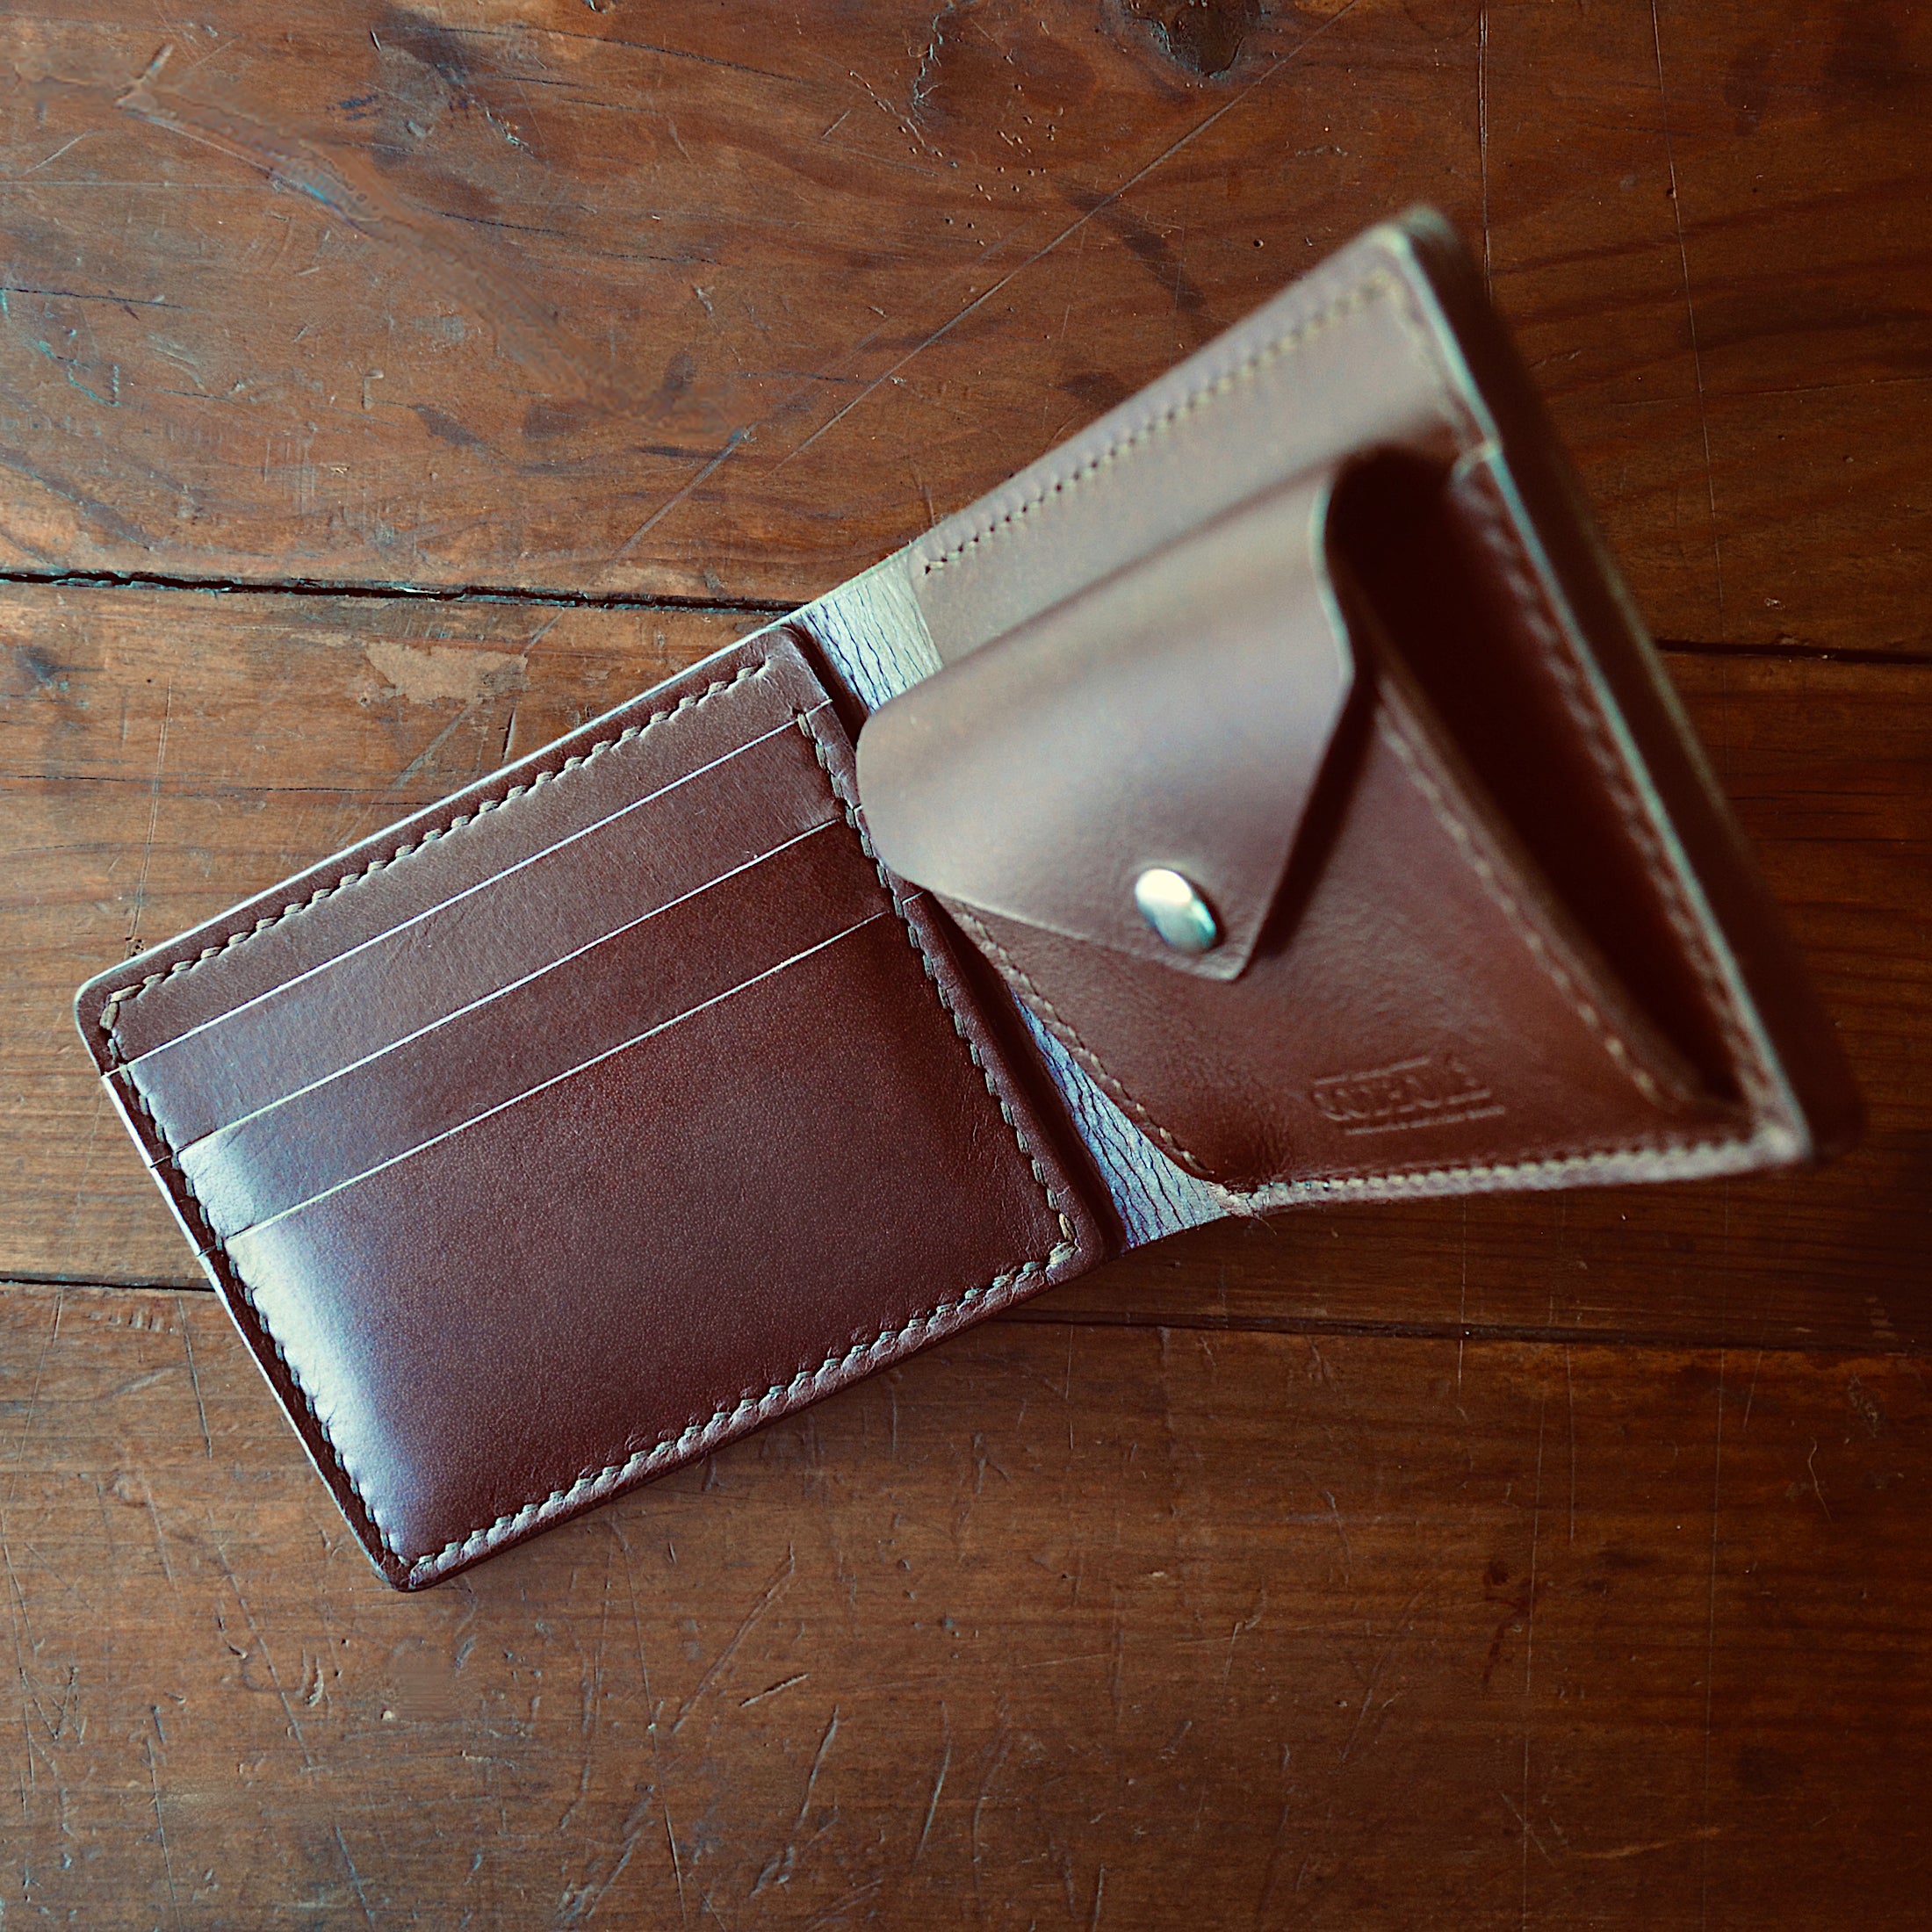 Genuine Leather Wallet with engraving- Made in SA